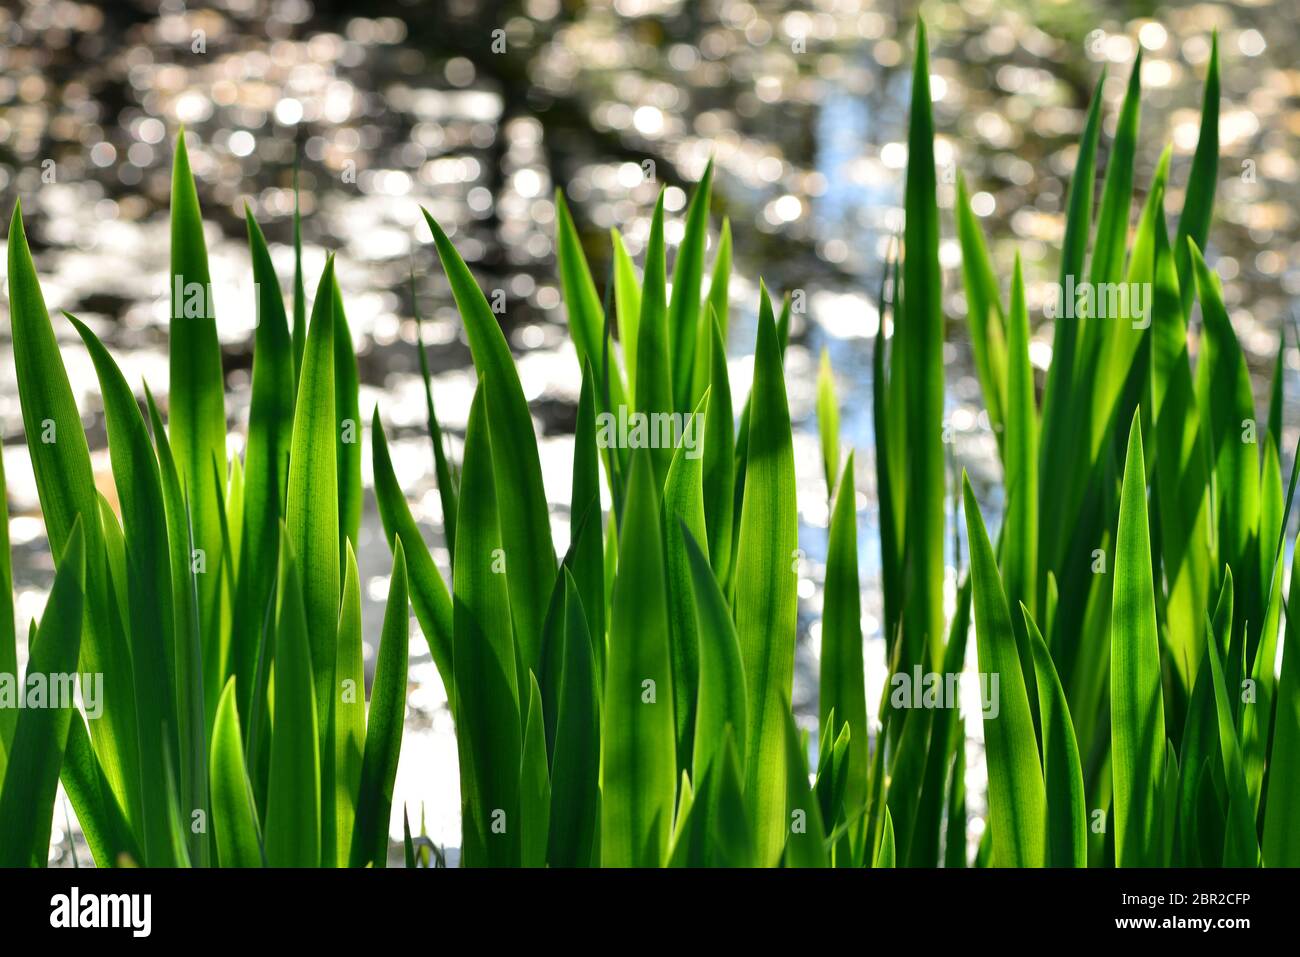 A nature background of green reeds against water reflections in a pond. Stock Photo